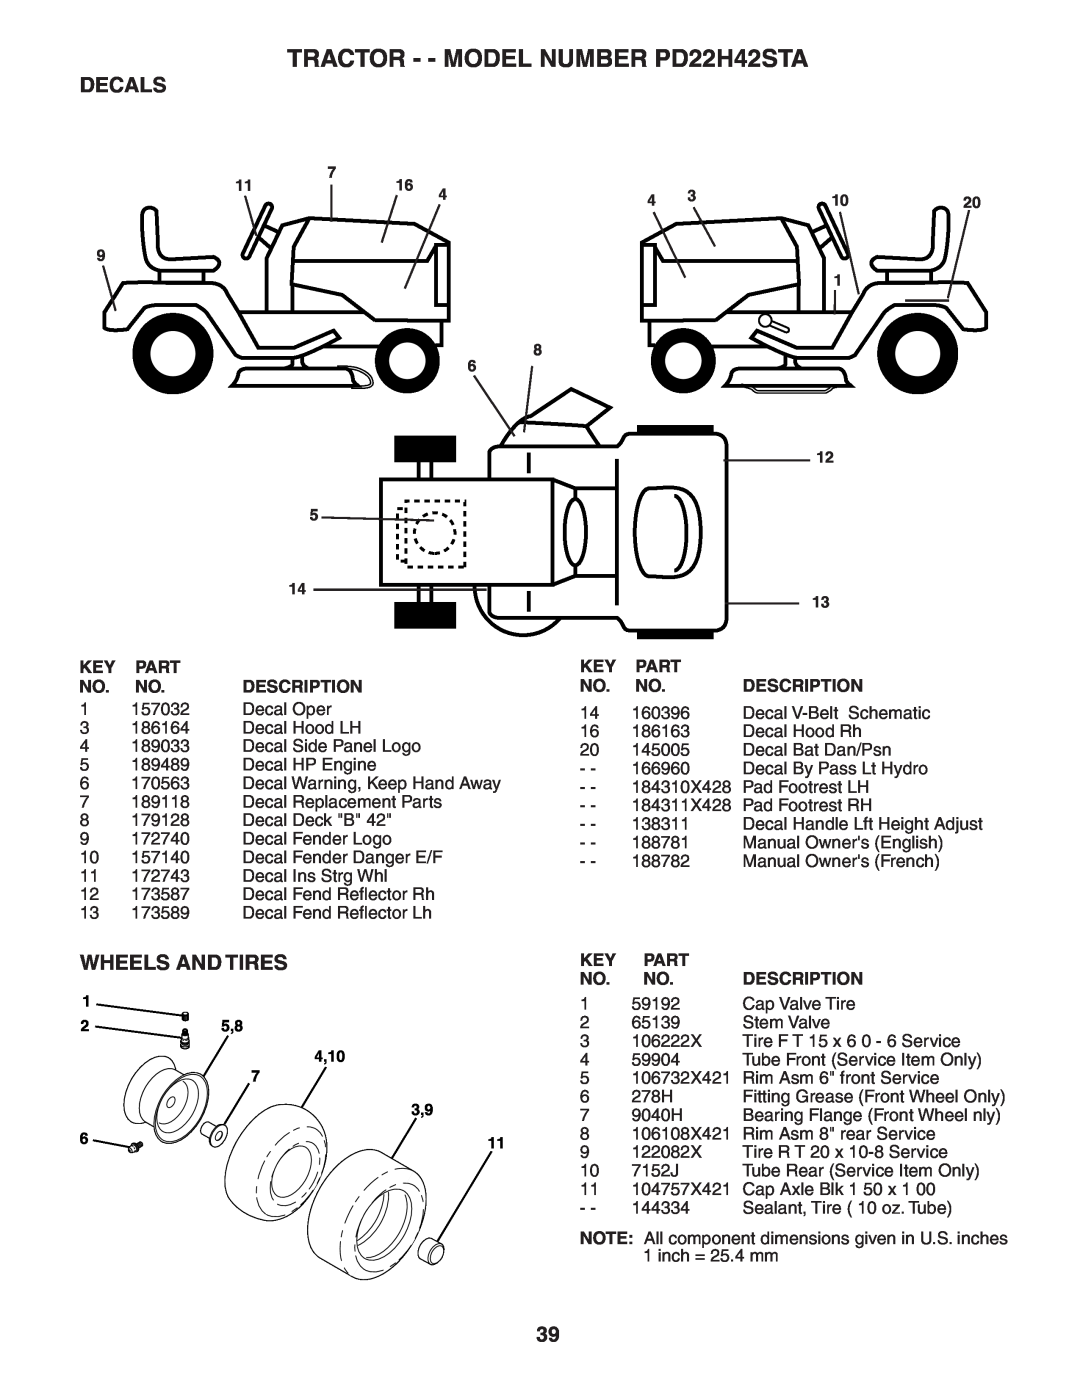 Poulan owner manual Decals, Wheels And Tires, TRACTOR - - MODEL NUMBER PD22H42STA, 25,8 4,10 